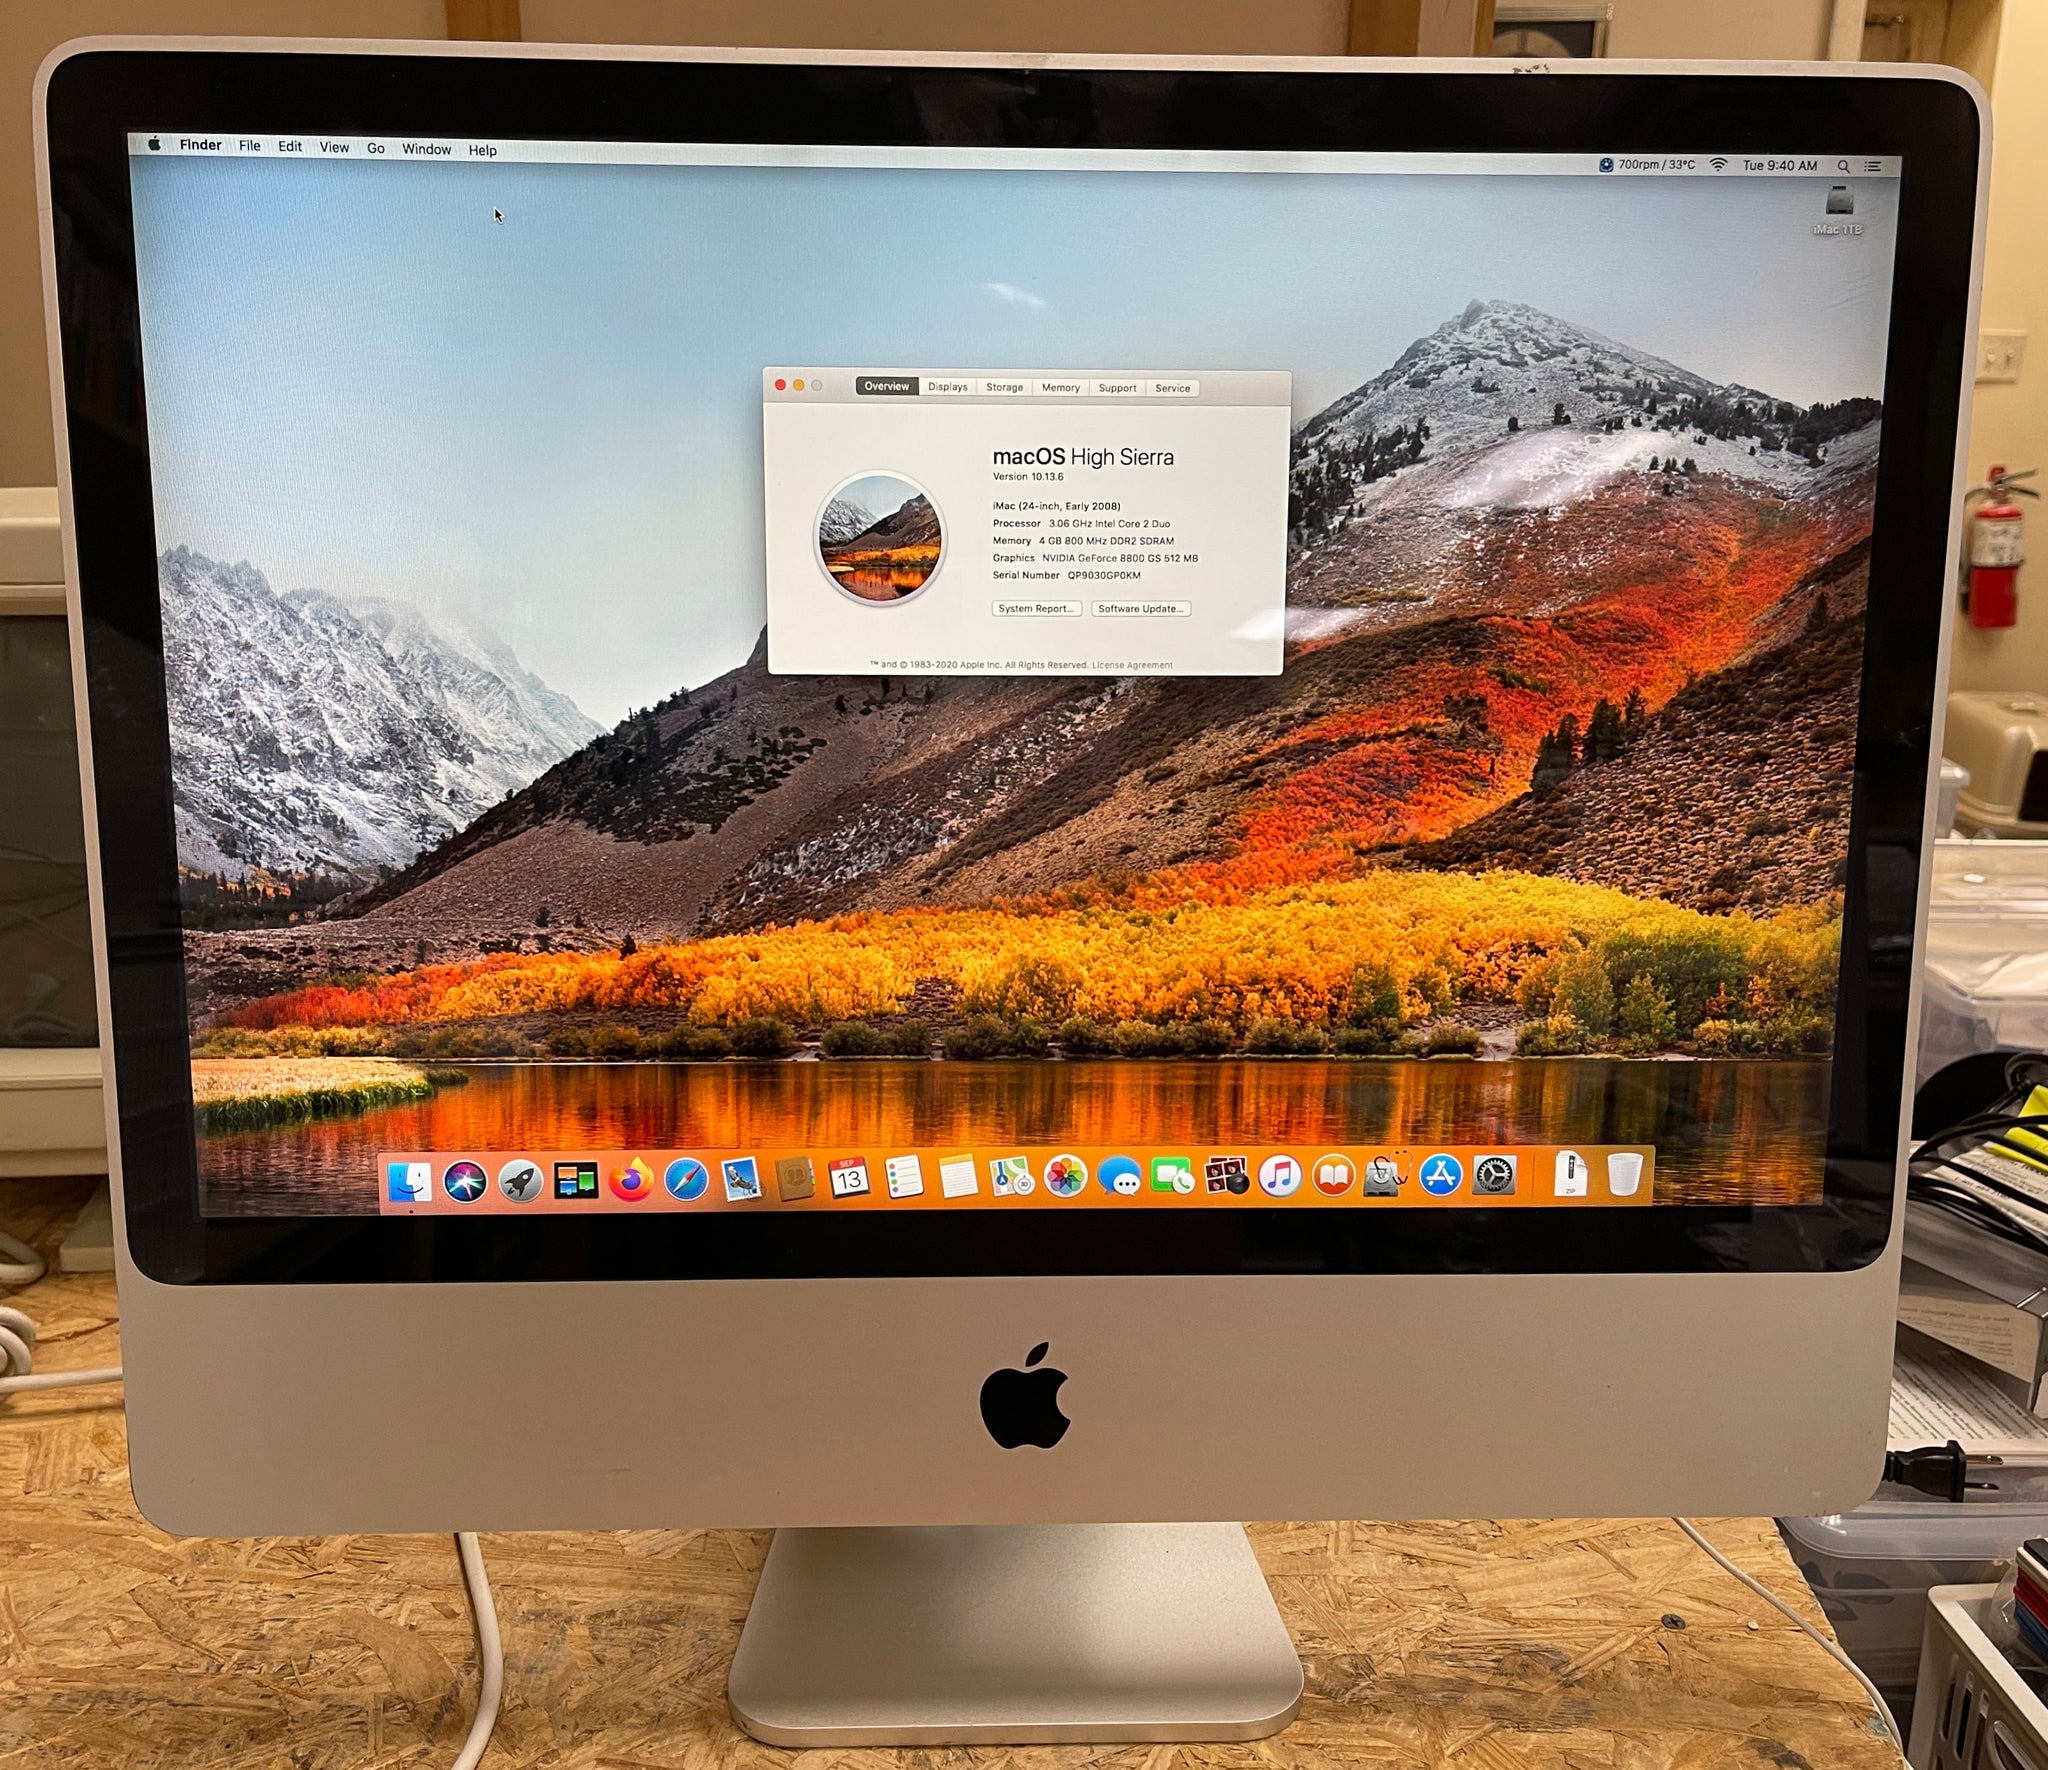 Apple iMac 24-inch Early 2008 3.06GHz Intel Core 2 Duo (MB398LL/A